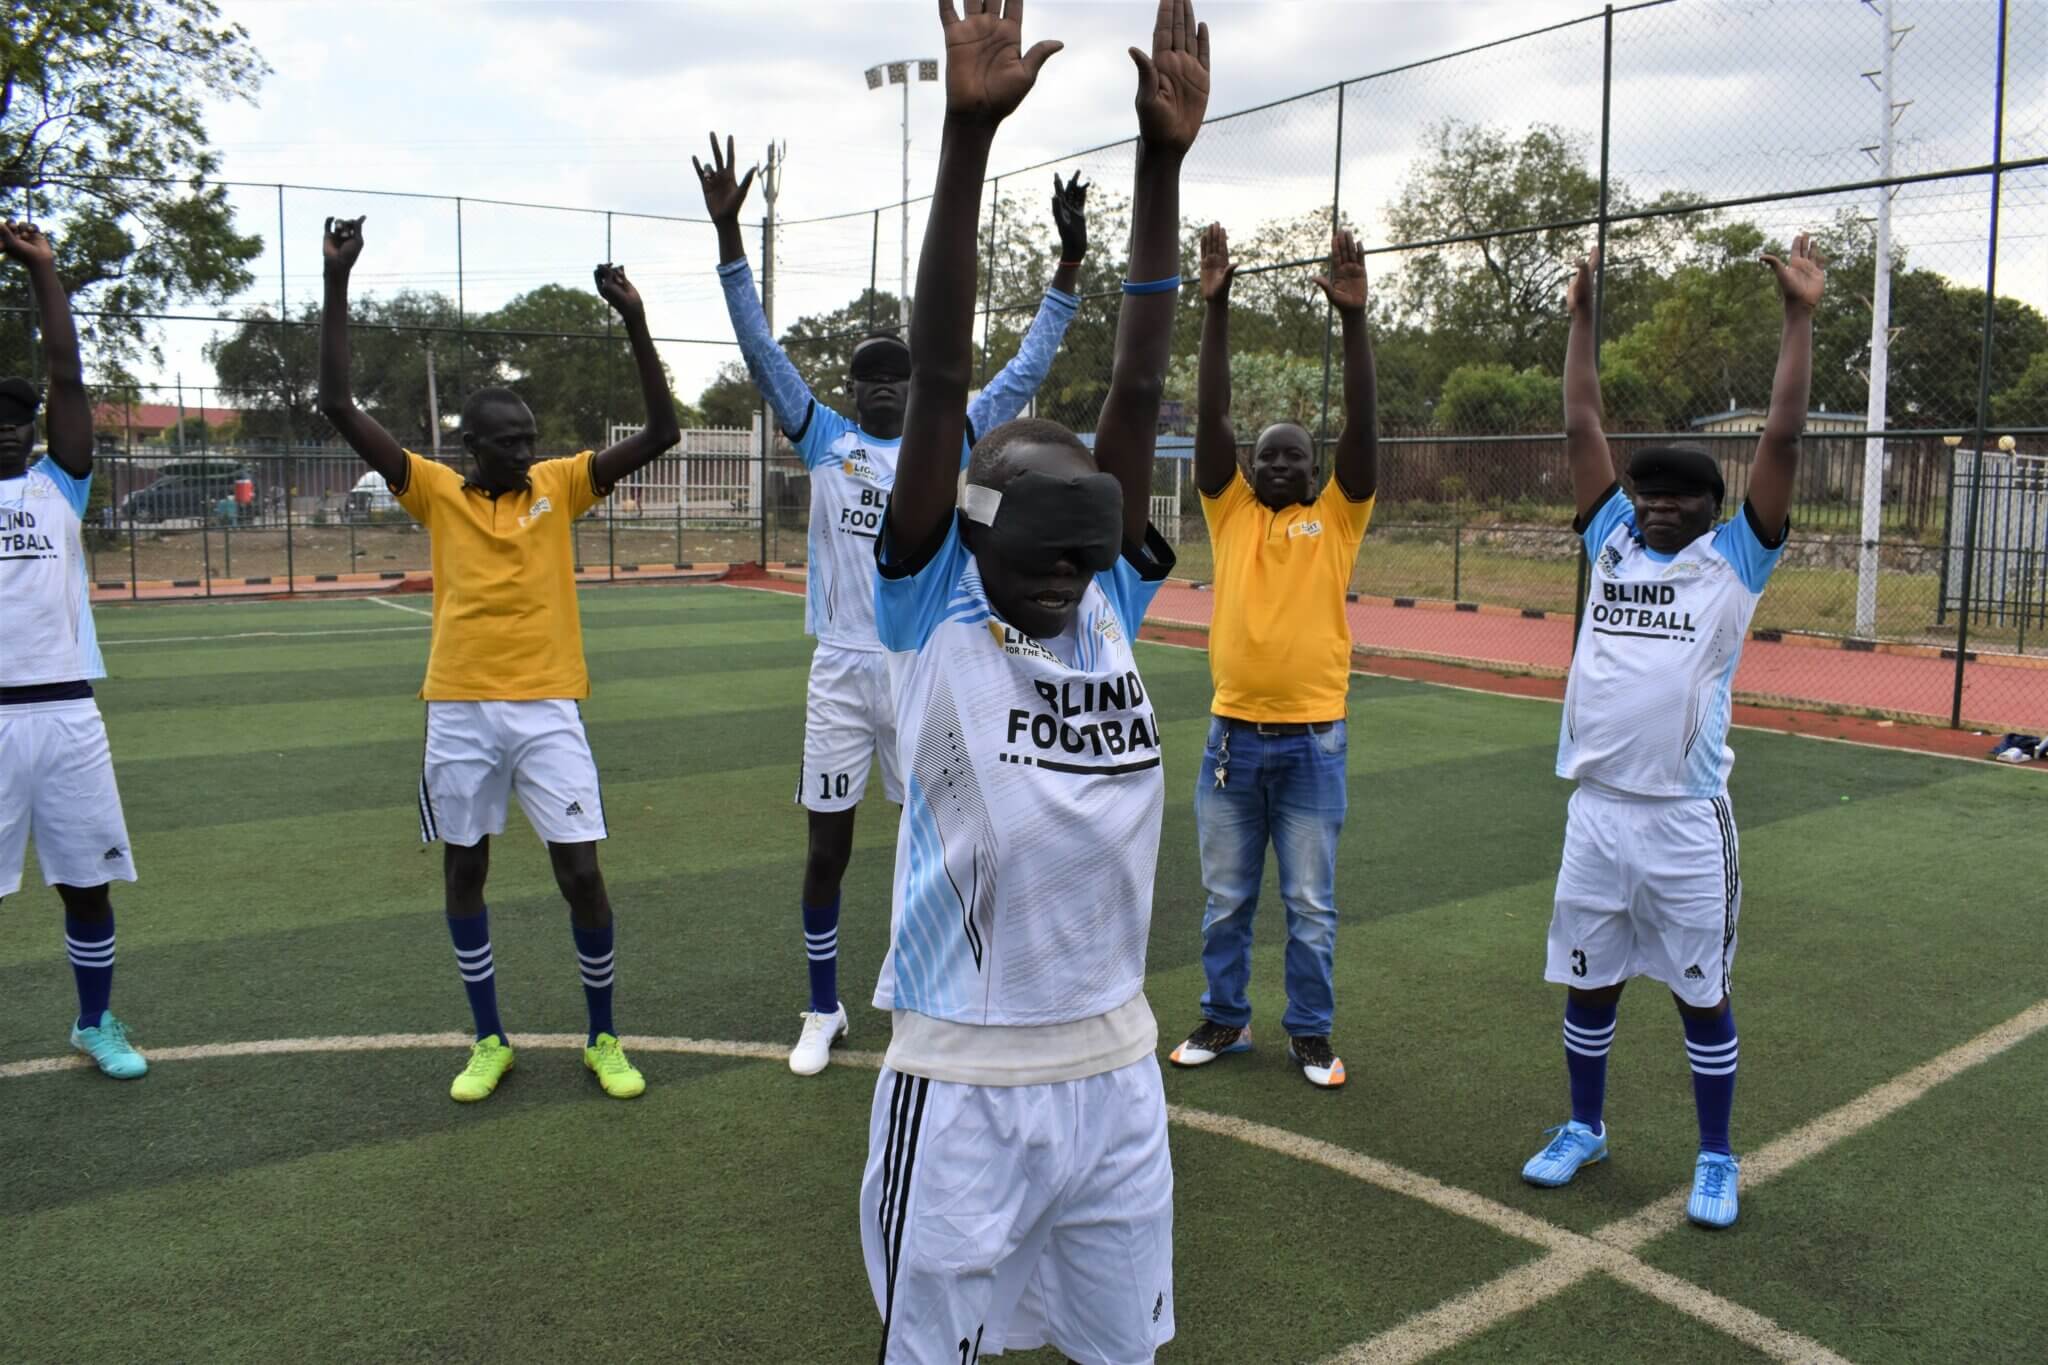 The members of the blind football team stand together in a circle on the pitch and stretch their hands in the air. They are warming up.